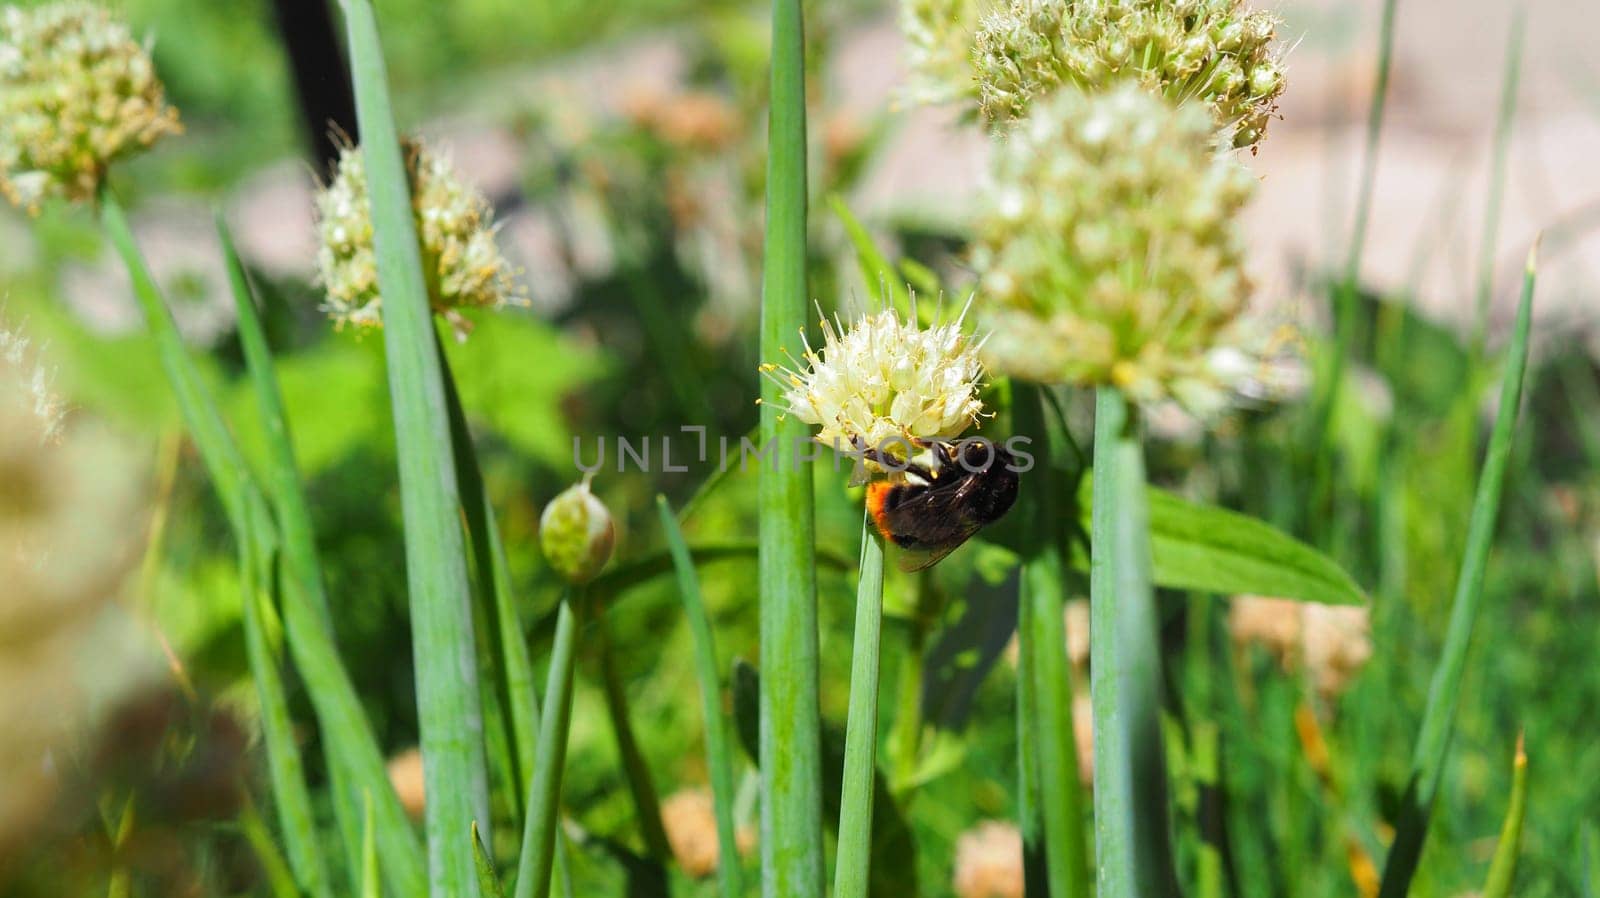 Natural vegetable green background.Flowering onion, growing onion seeds for planting next year.Vegetable growing concept. Agricultural